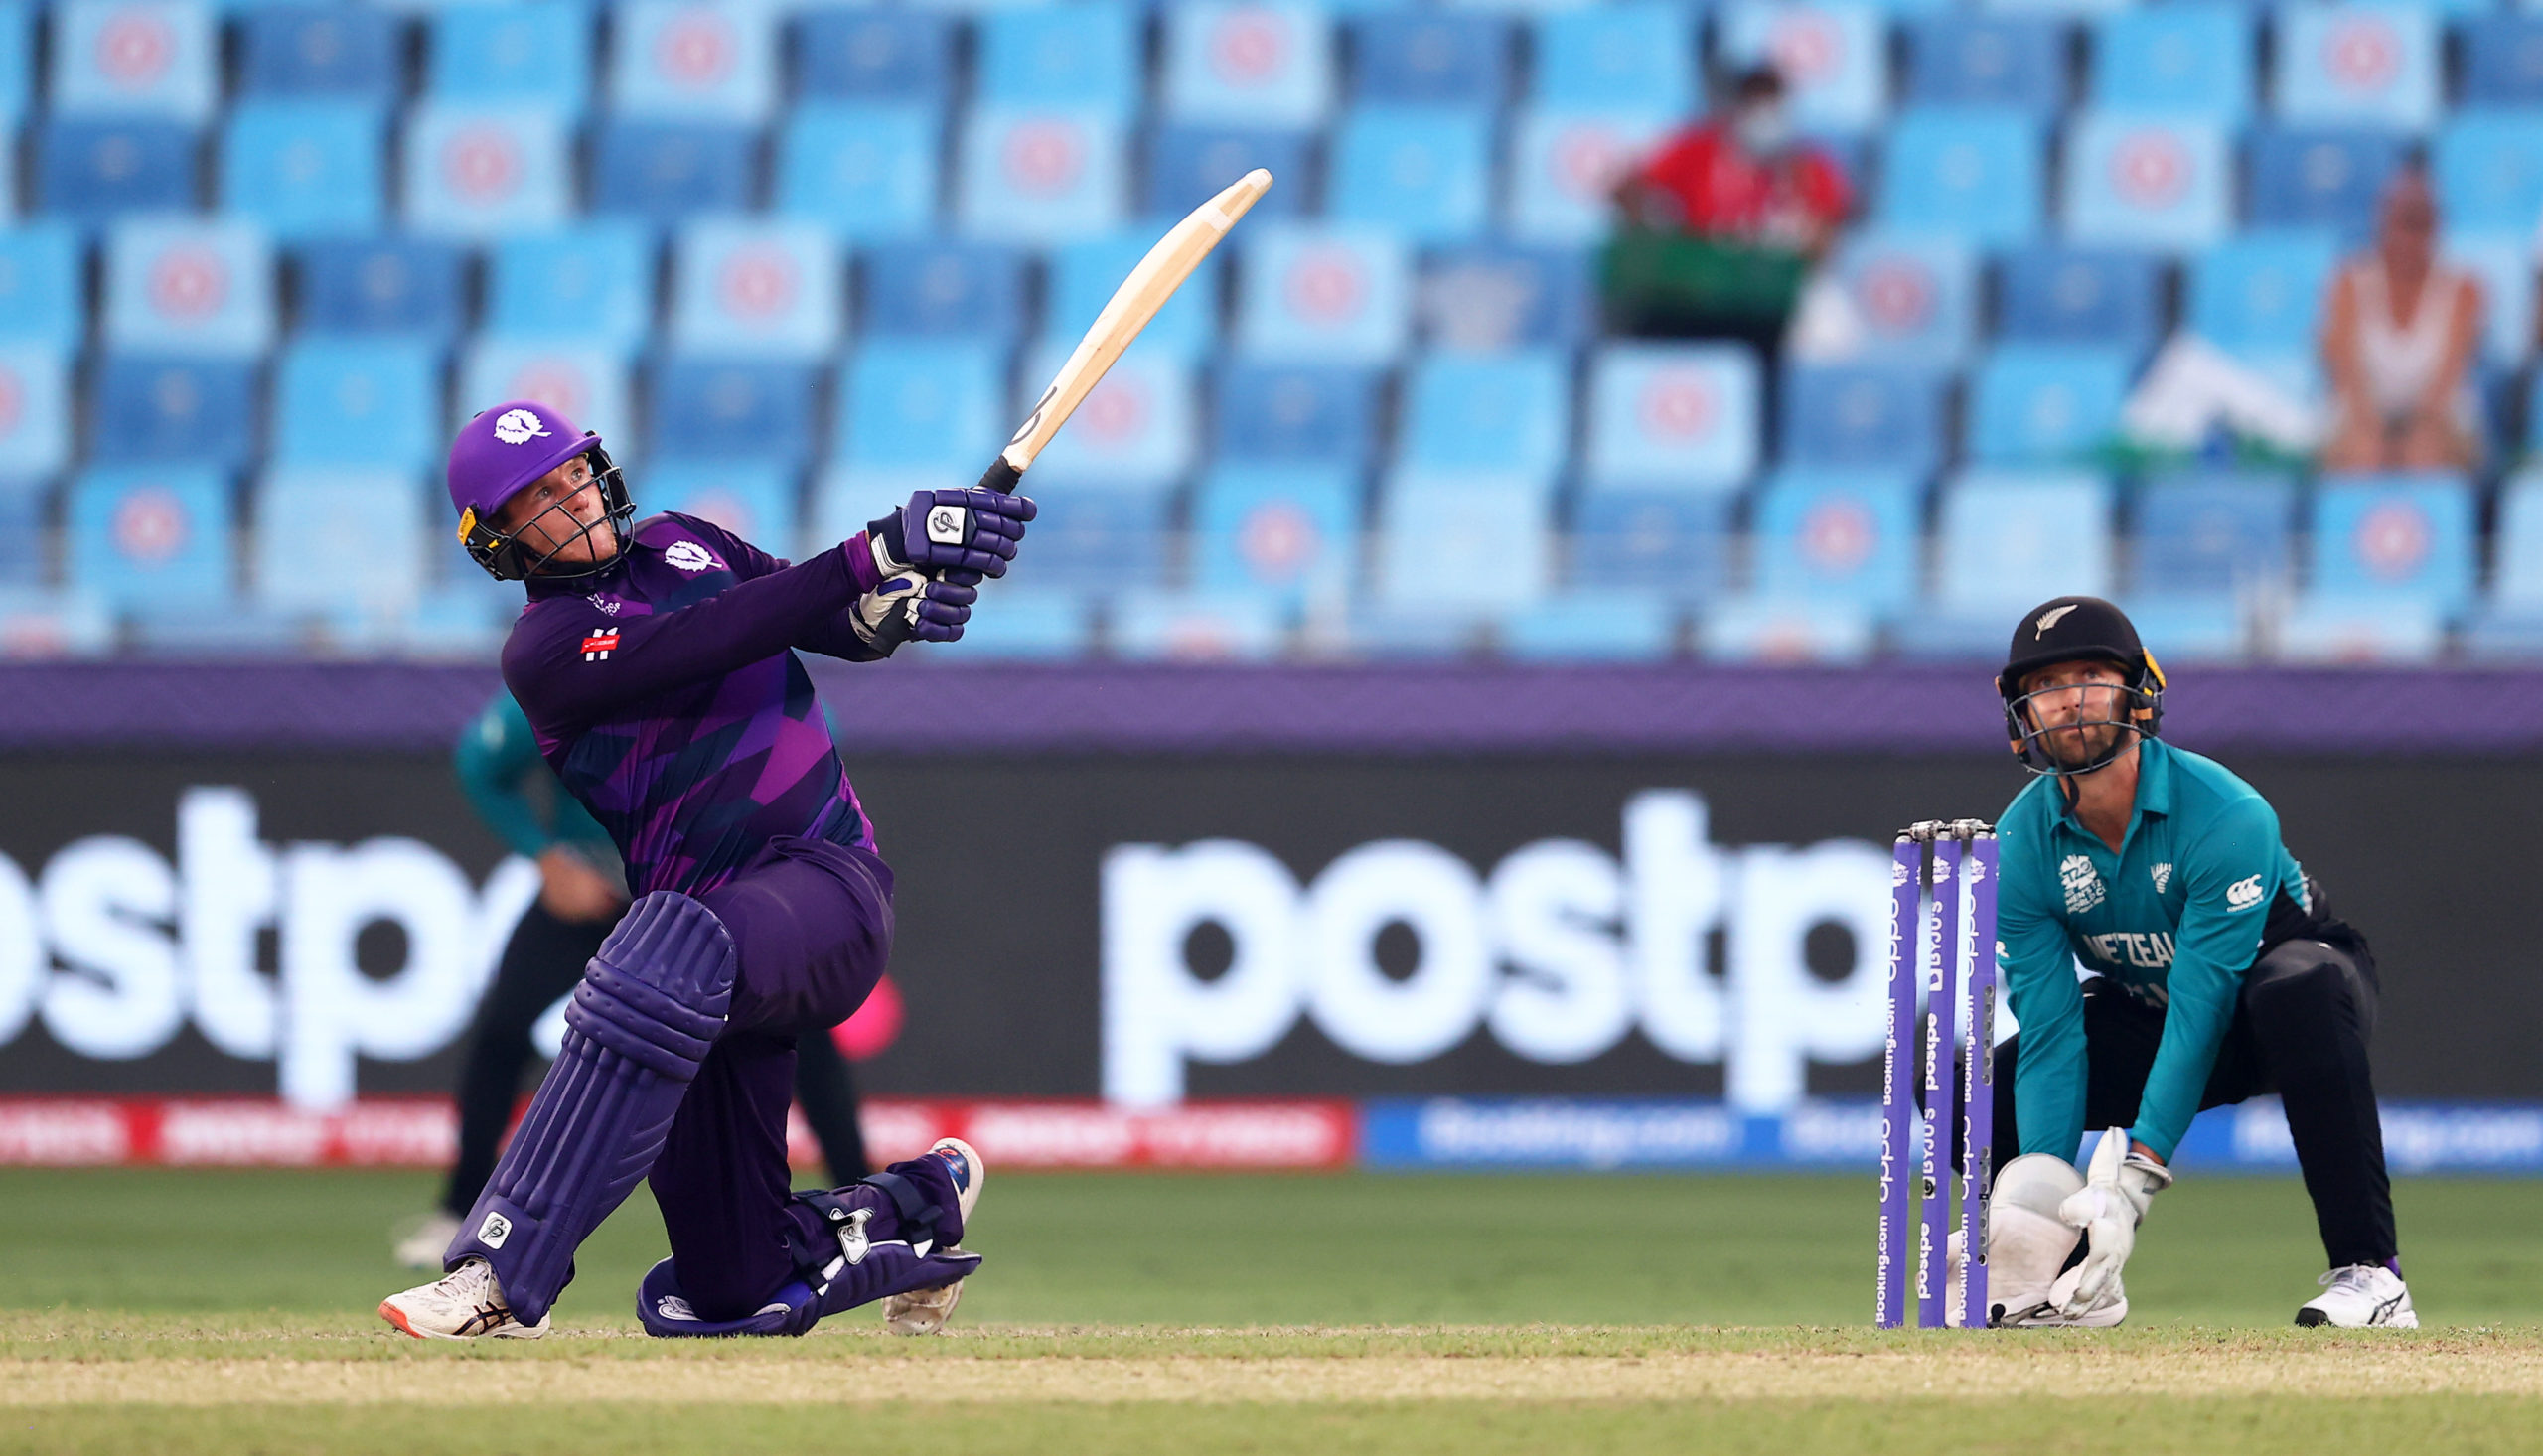 Scots so near yet so far against strong New Zealand side at T20 World Cup